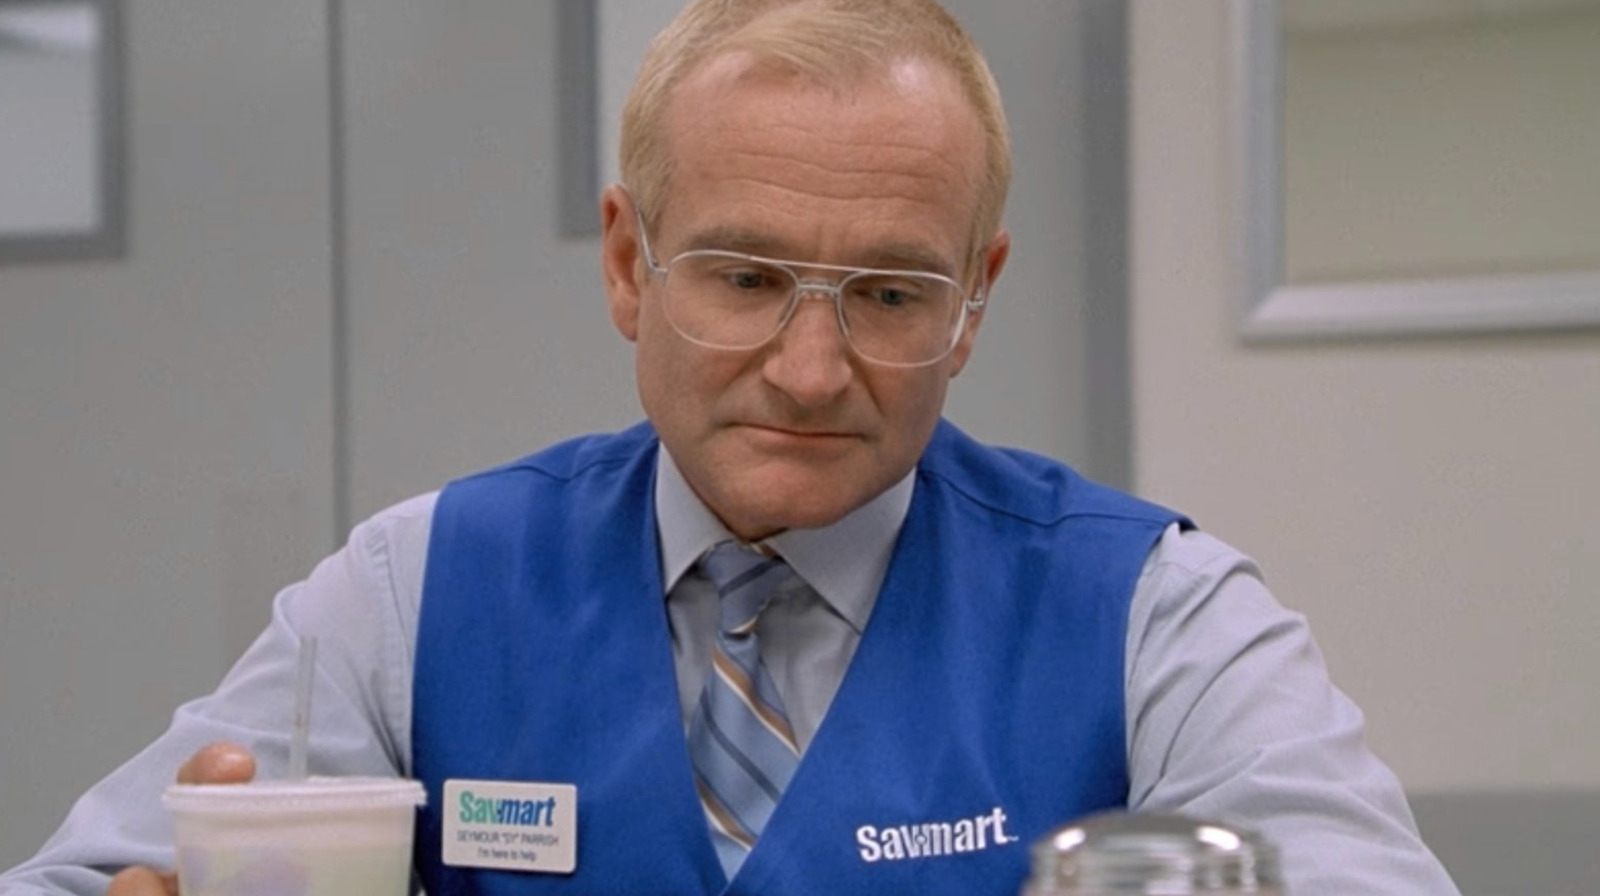 connie nielsen one hour photo